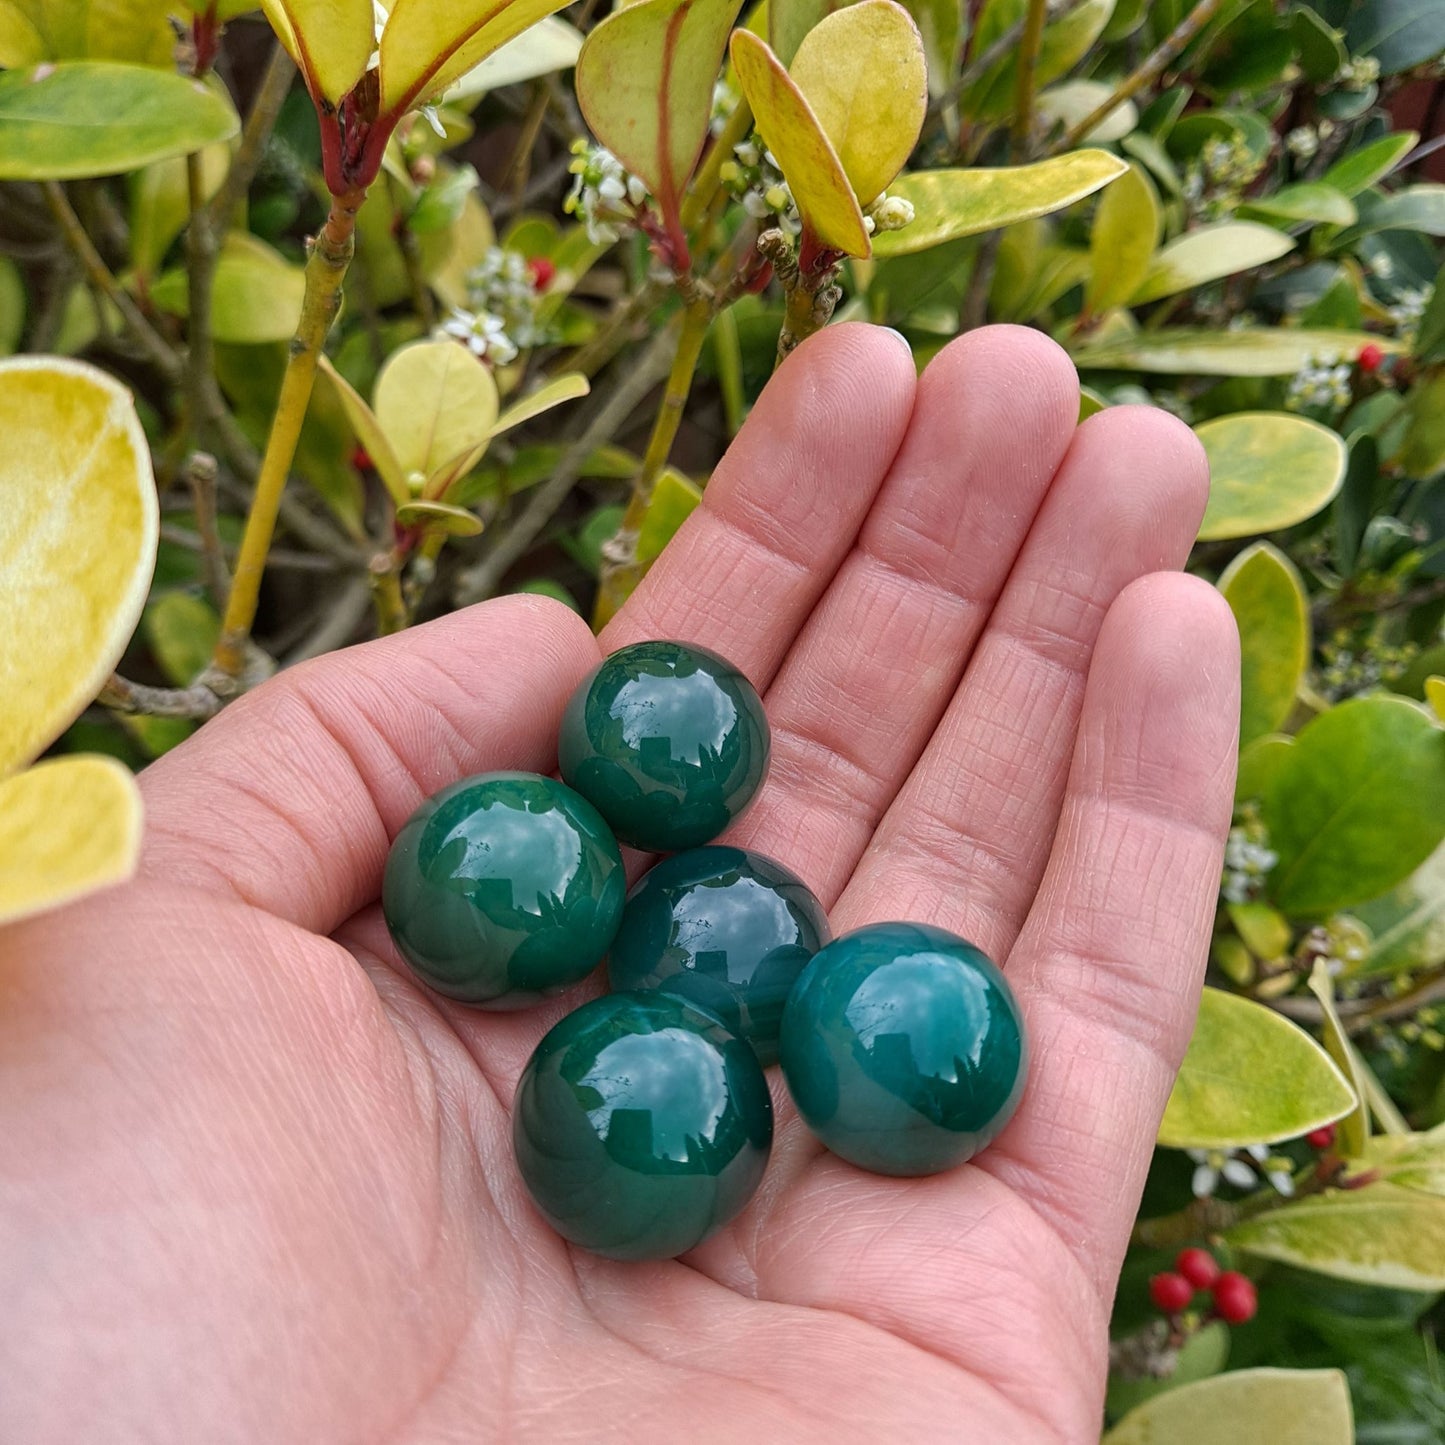 Dumi's Crystals | Green Agate Mini Spheres (20mm) | A collection of captivating Green Agate Mini Spheres, each displaying a unique variation of green hues and patterns. These 20mm spheres are believed to promote peace, emotional balance, personal growth, and a connection with nature. Perfect for meditation, crystal grids, or carrying with you throughout the day.